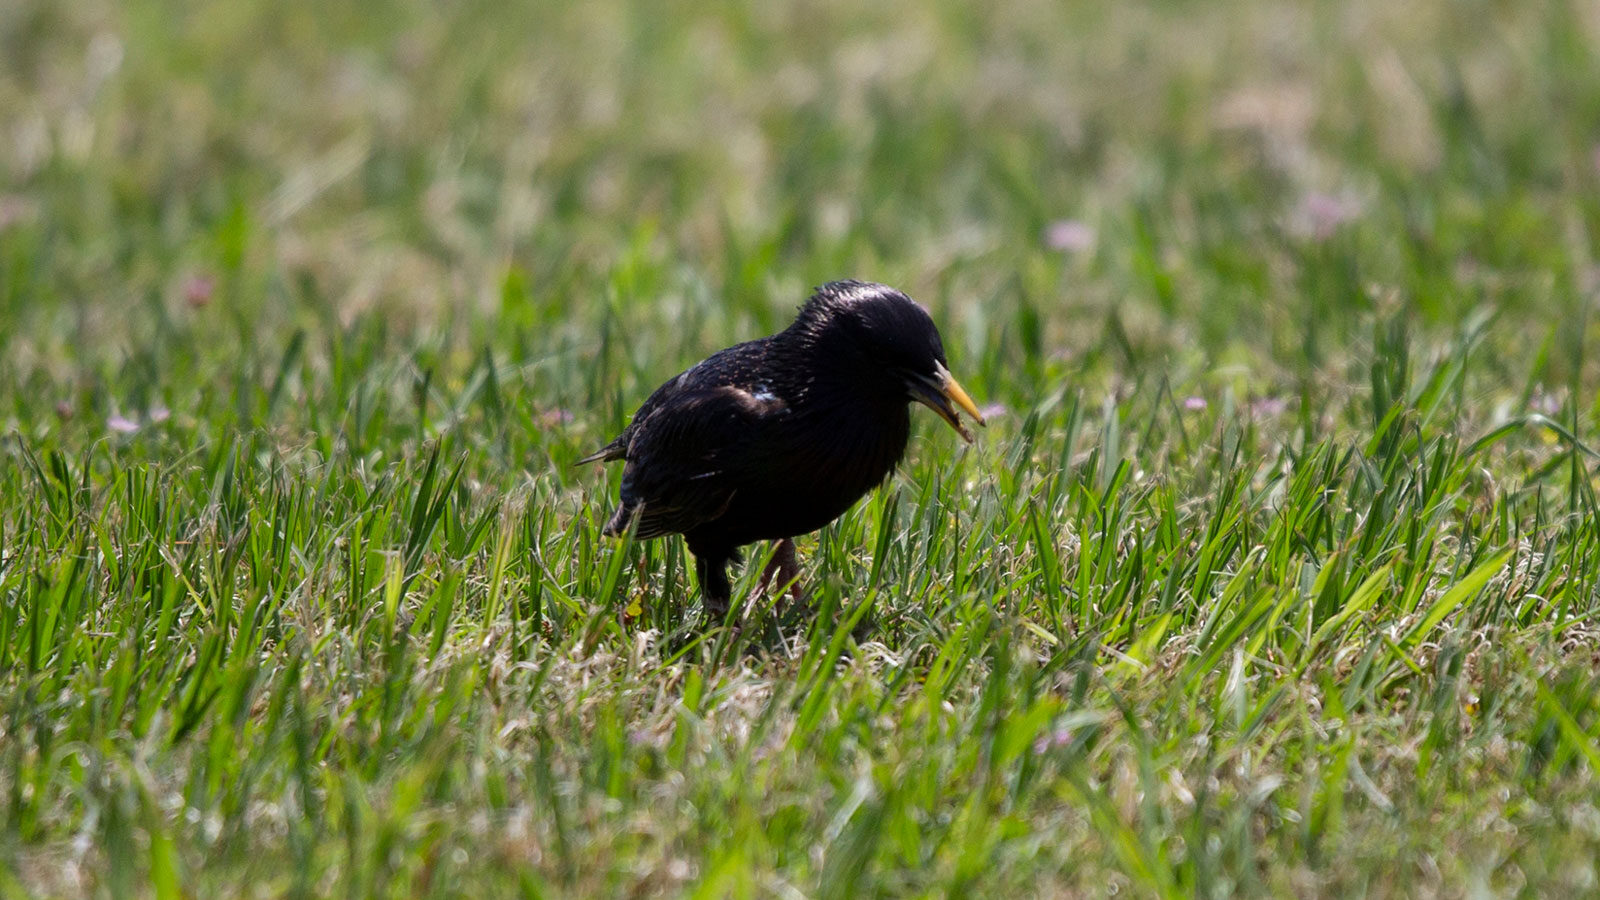 European starling foraging on a well-manicured lawn